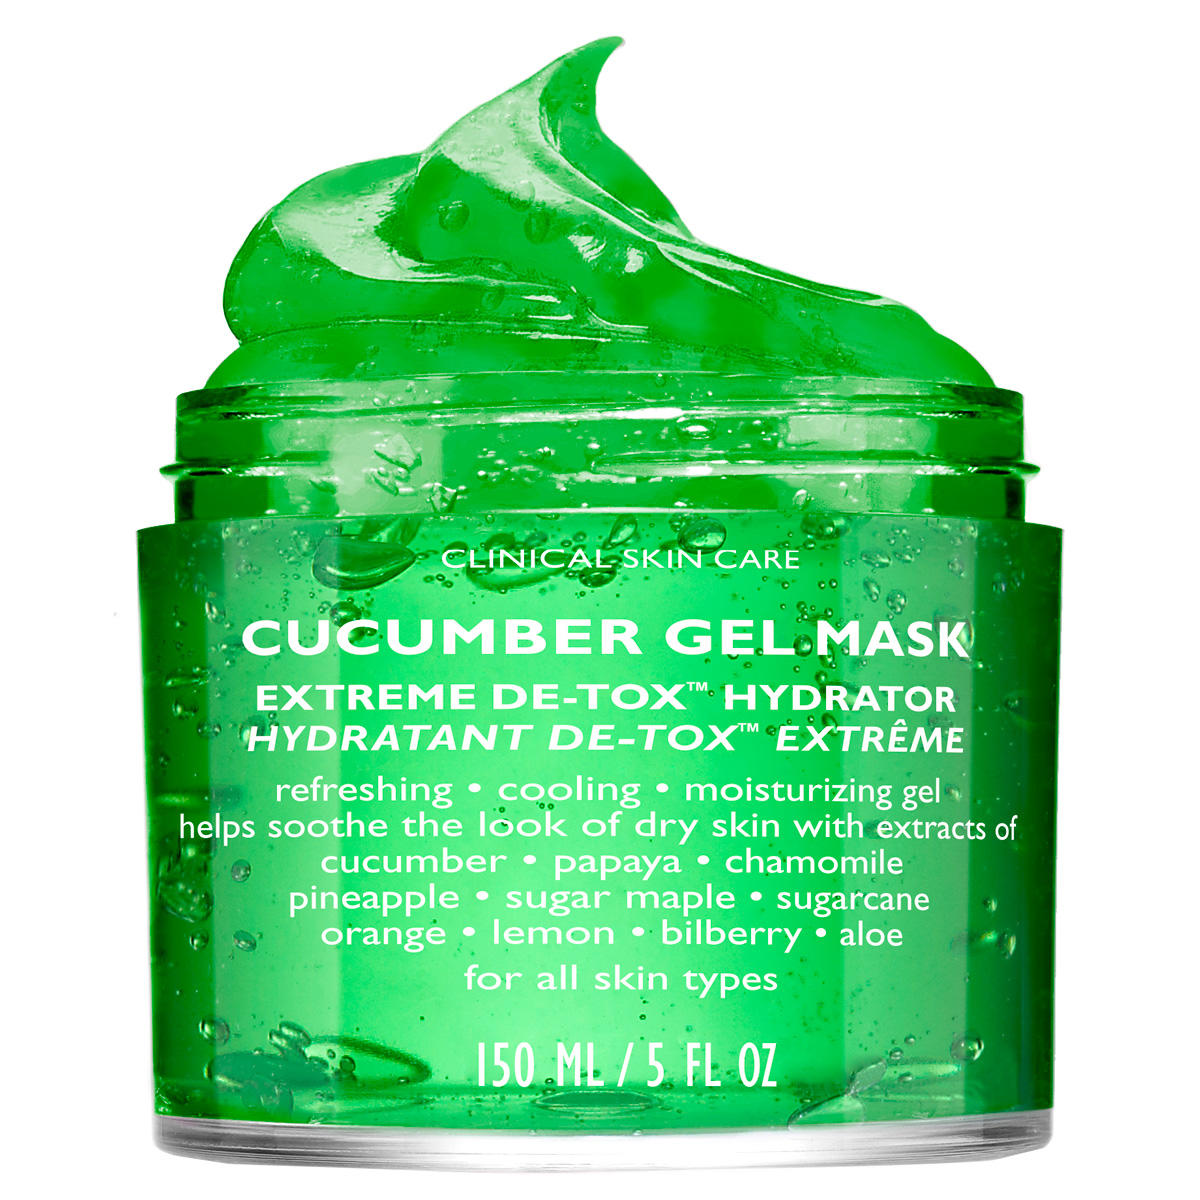 PETER THOMAS ROTH CLINICAL SKIN CARE Cucumber Gel Mask 150 ml - 3